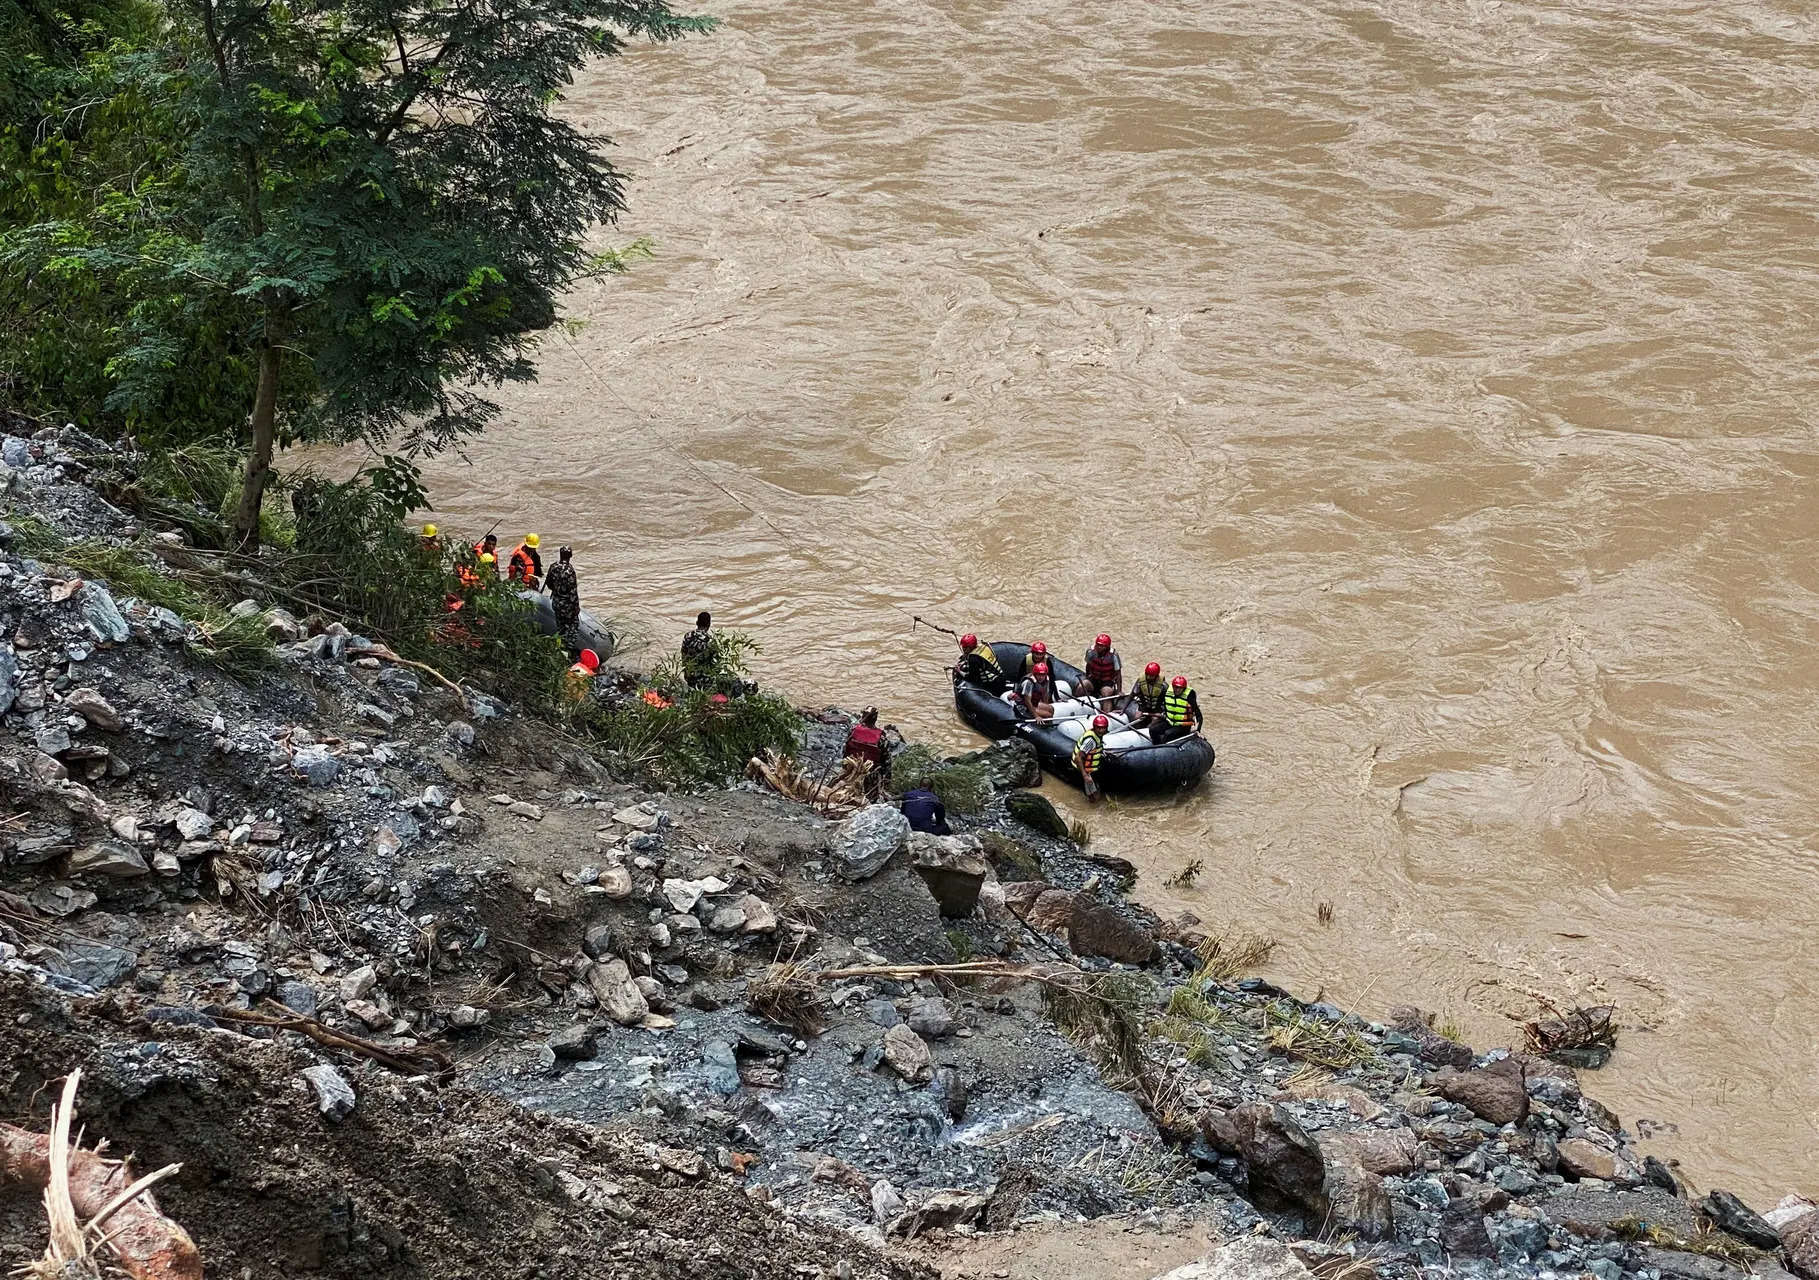 Seven Indians among 60 people believed to be missing after landslide in Nepal: Media reports 